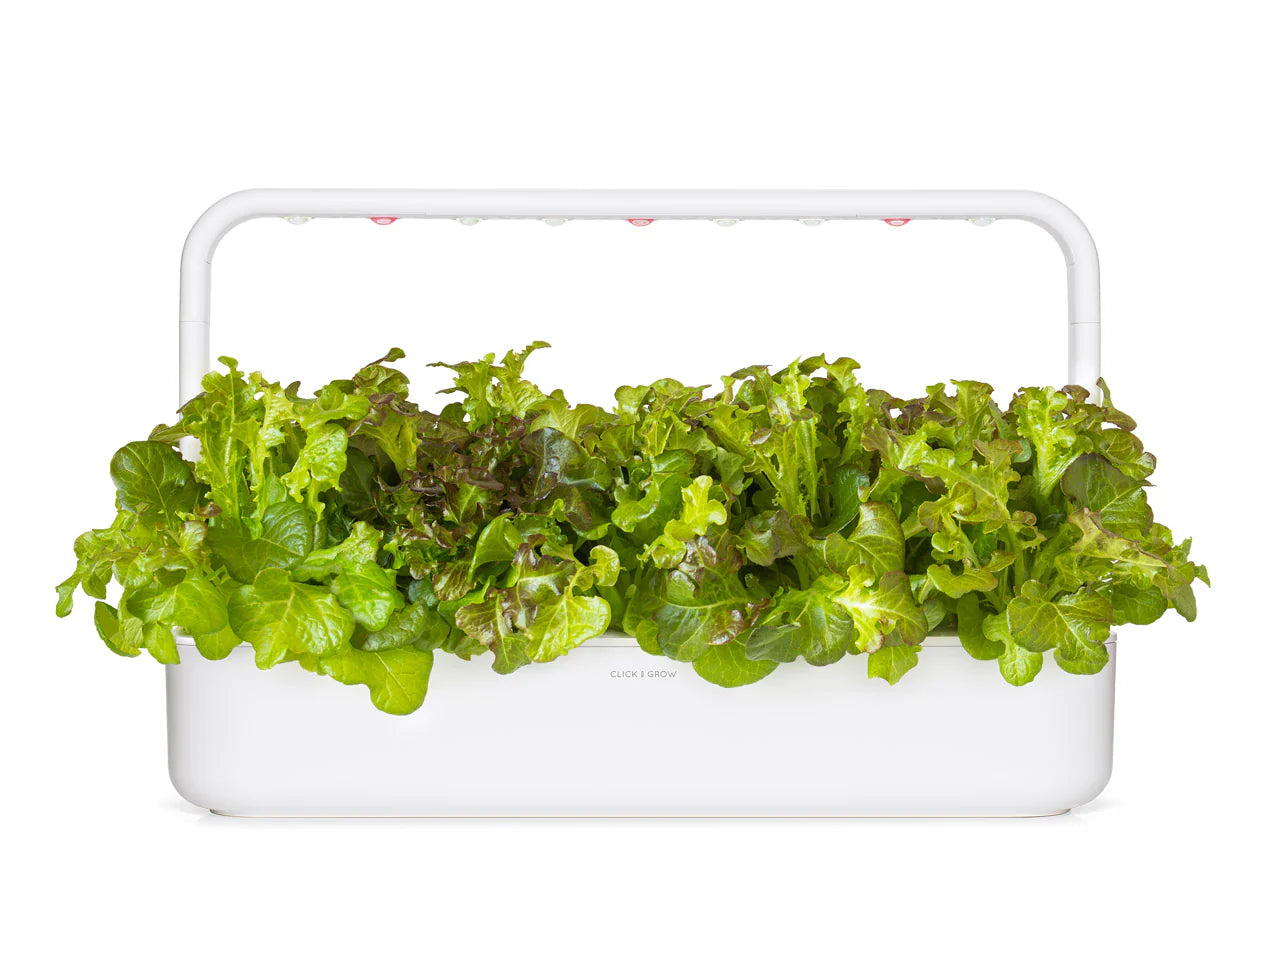 Click & Grow Smart Garden 9 with Red Oakleaf Lettuce